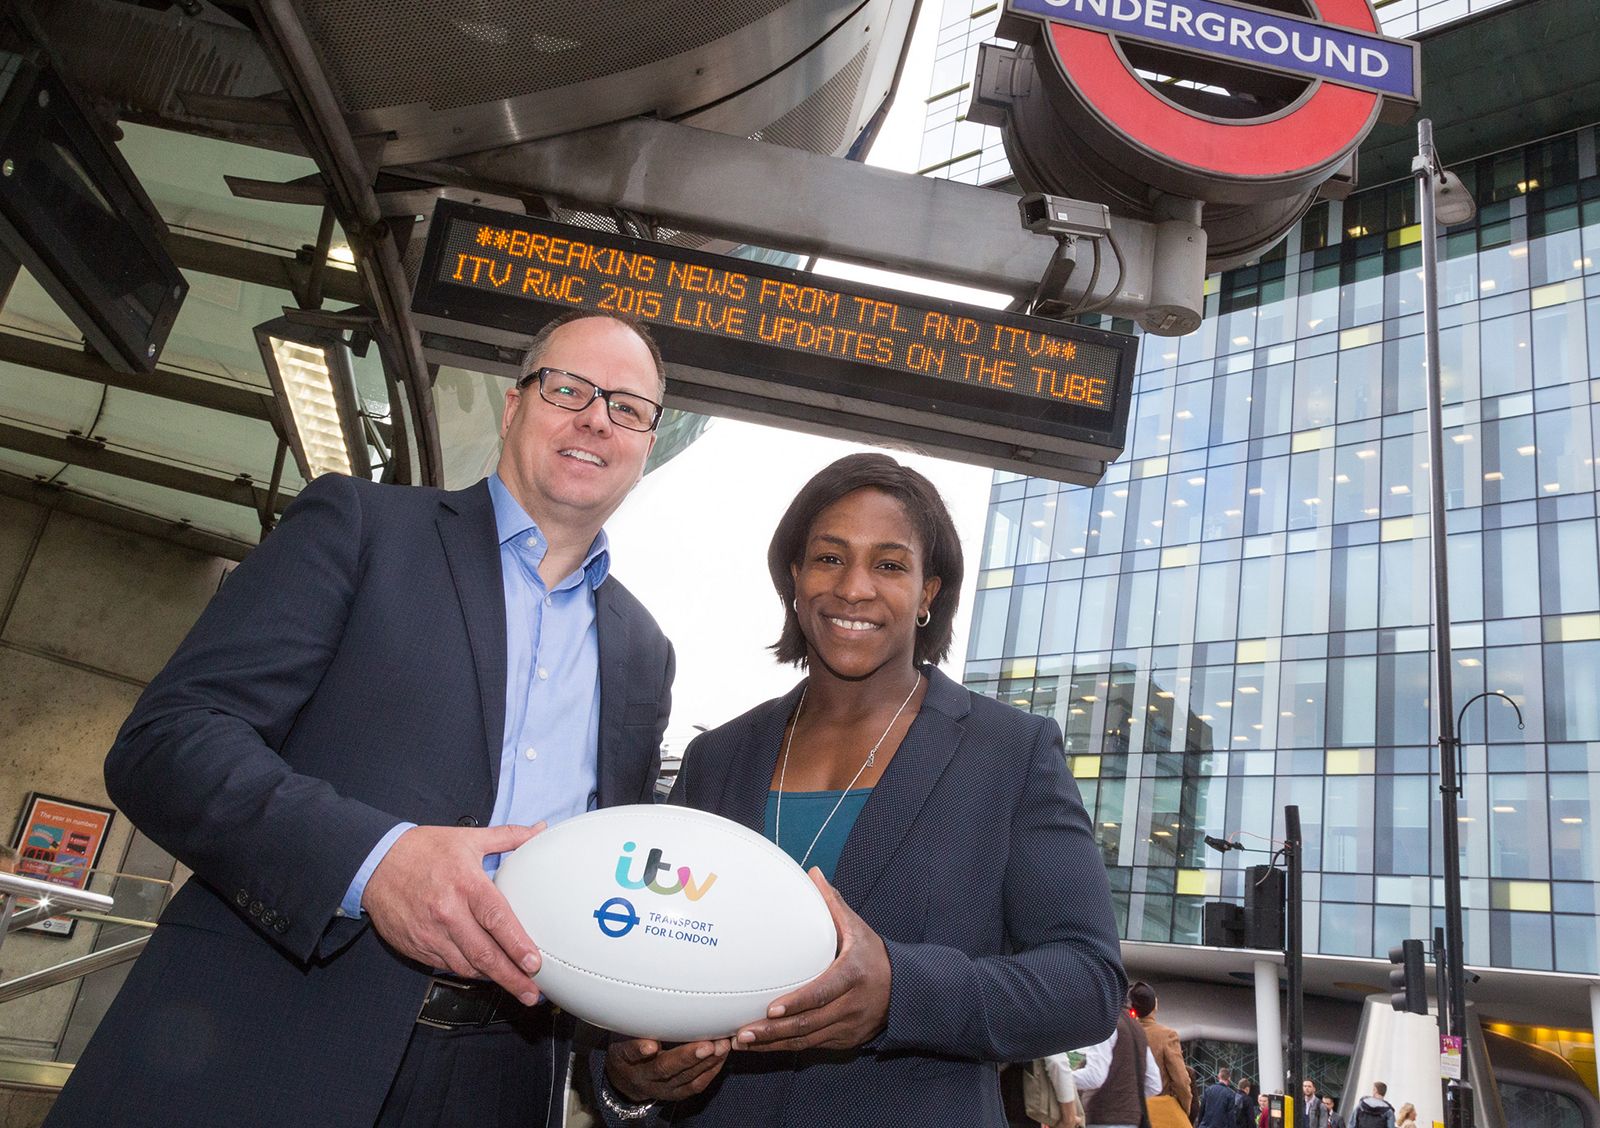 rugby world cup news and scores to be scrolled on london underground time boards image 1